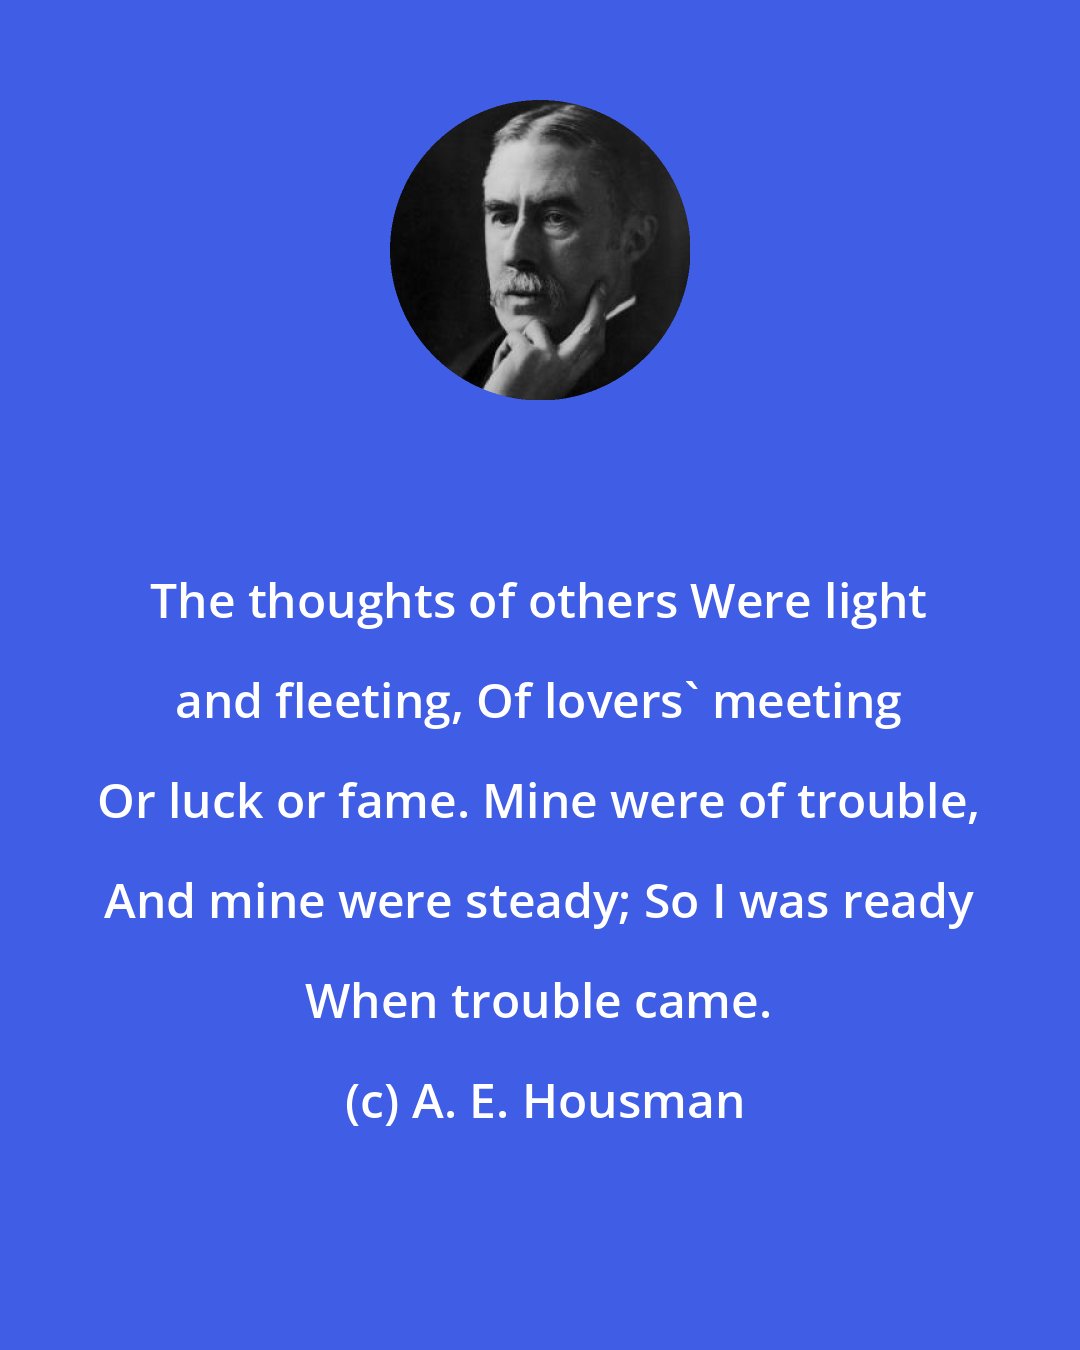 A. E. Housman: The thoughts of others Were light and fleeting, Of lovers' meeting Or luck or fame. Mine were of trouble, And mine were steady; So I was ready When trouble came.